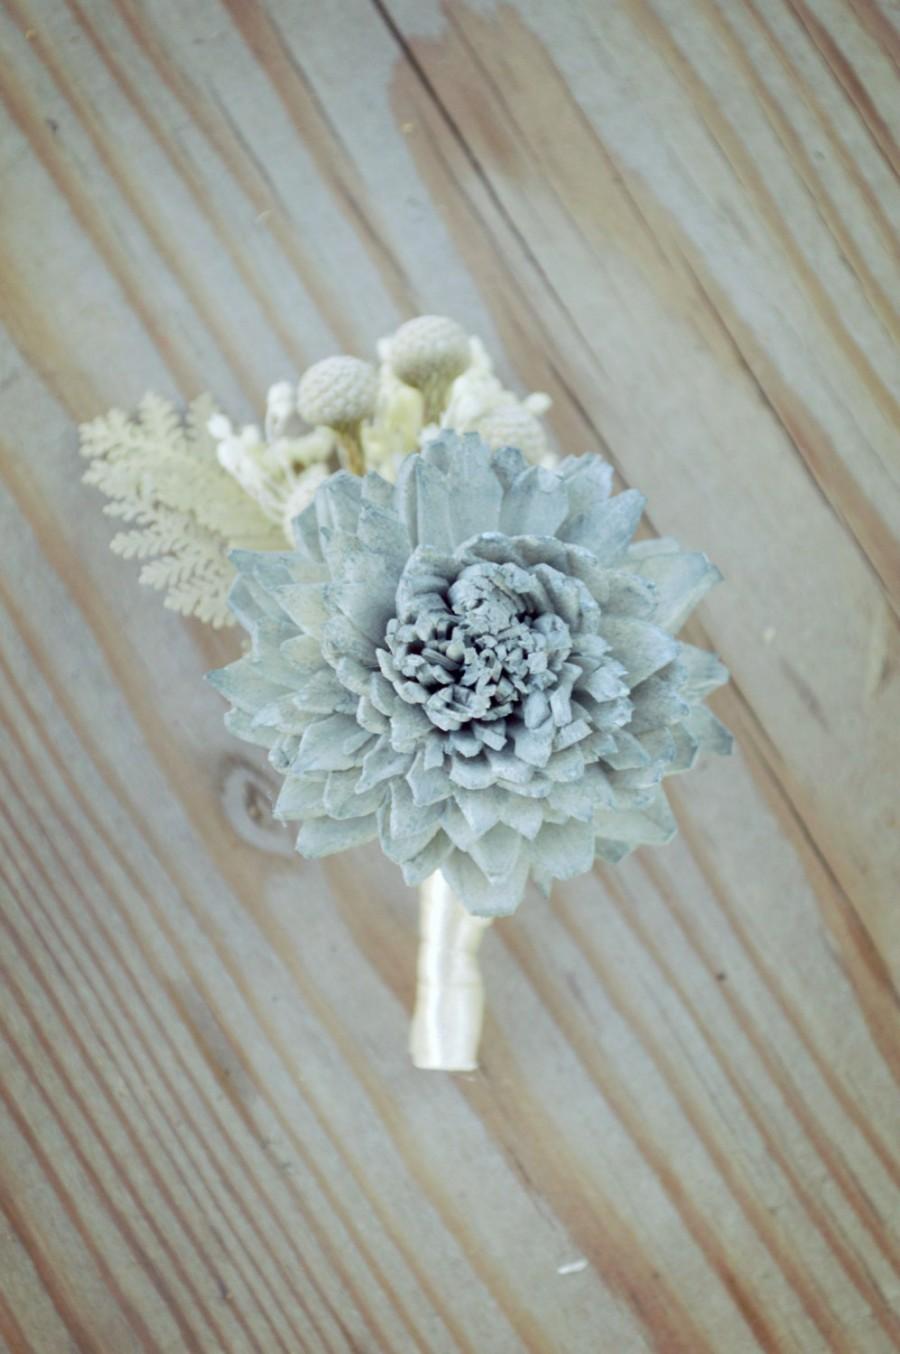 Mariage - Slate Wedding Collection Boutonniere Bouquet Sola Flowers and dried Flowers Grey Navy Blue Dusty Miller Silver Brunia Anemone